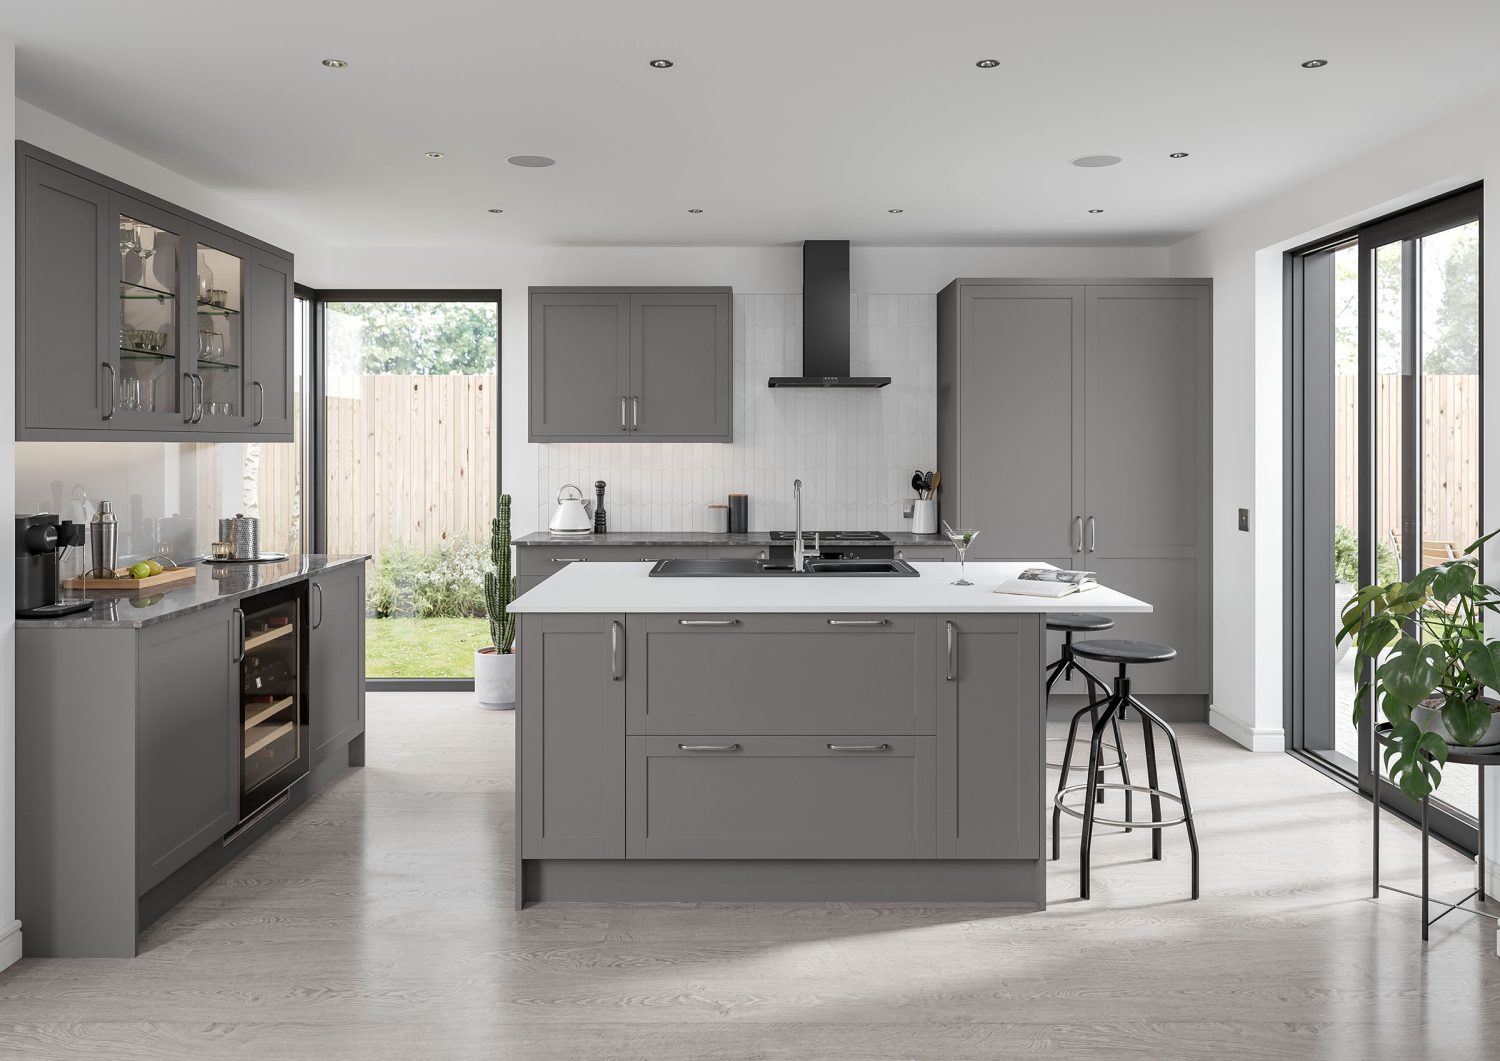 Skye Shaker Kitchen in dust grey is shown in this kitchen design. White worktops and dust grey cabinets create a modern kitchen feel. A mix of tall cabinets and larders along with a kitchen island, creates an impressive space. Wall to ceiling windows make the kitchen bright and airy, there are also smart features like a coffee machine, designer bar stools and cooker with hood in matte black.